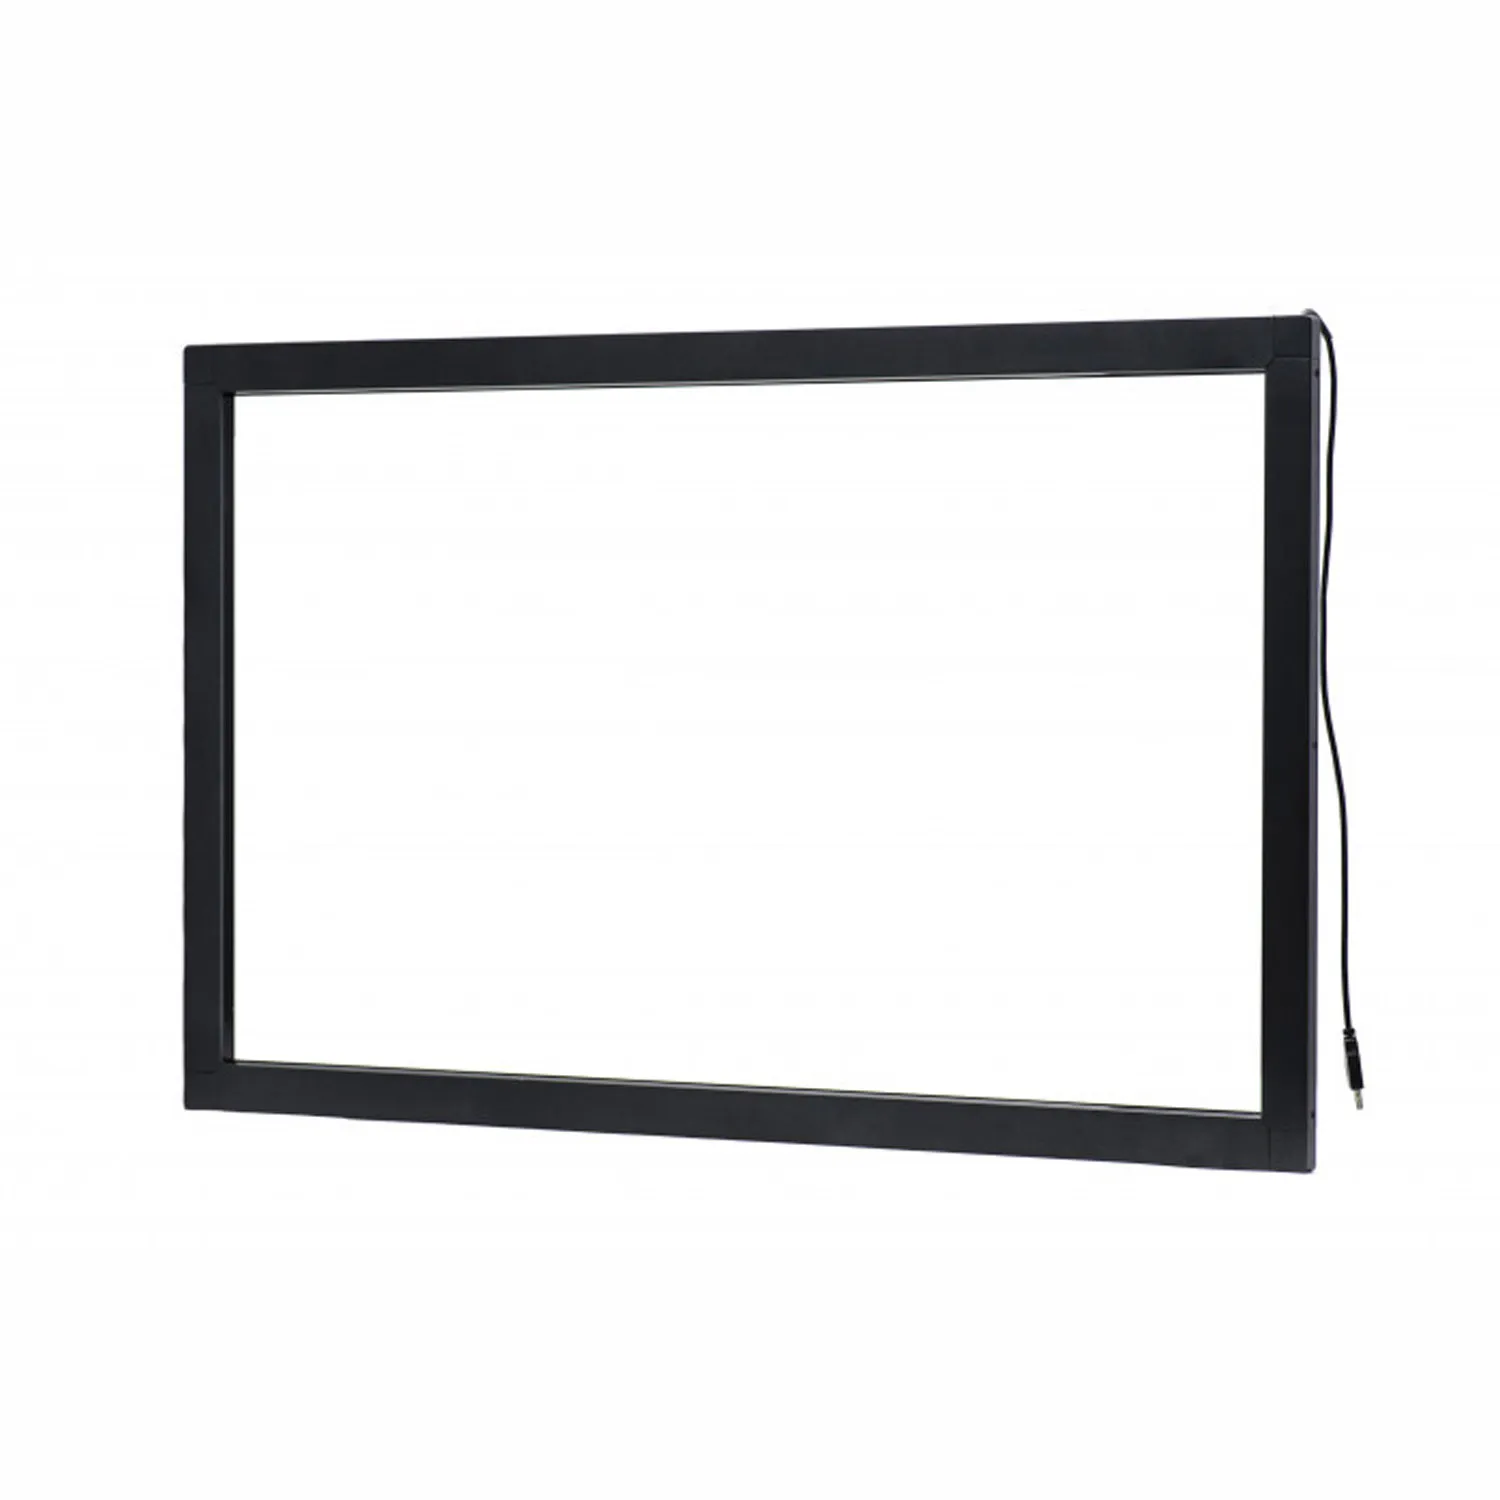 Touch frame Keetouch GmbH 40" KP-400-IP2S0U1